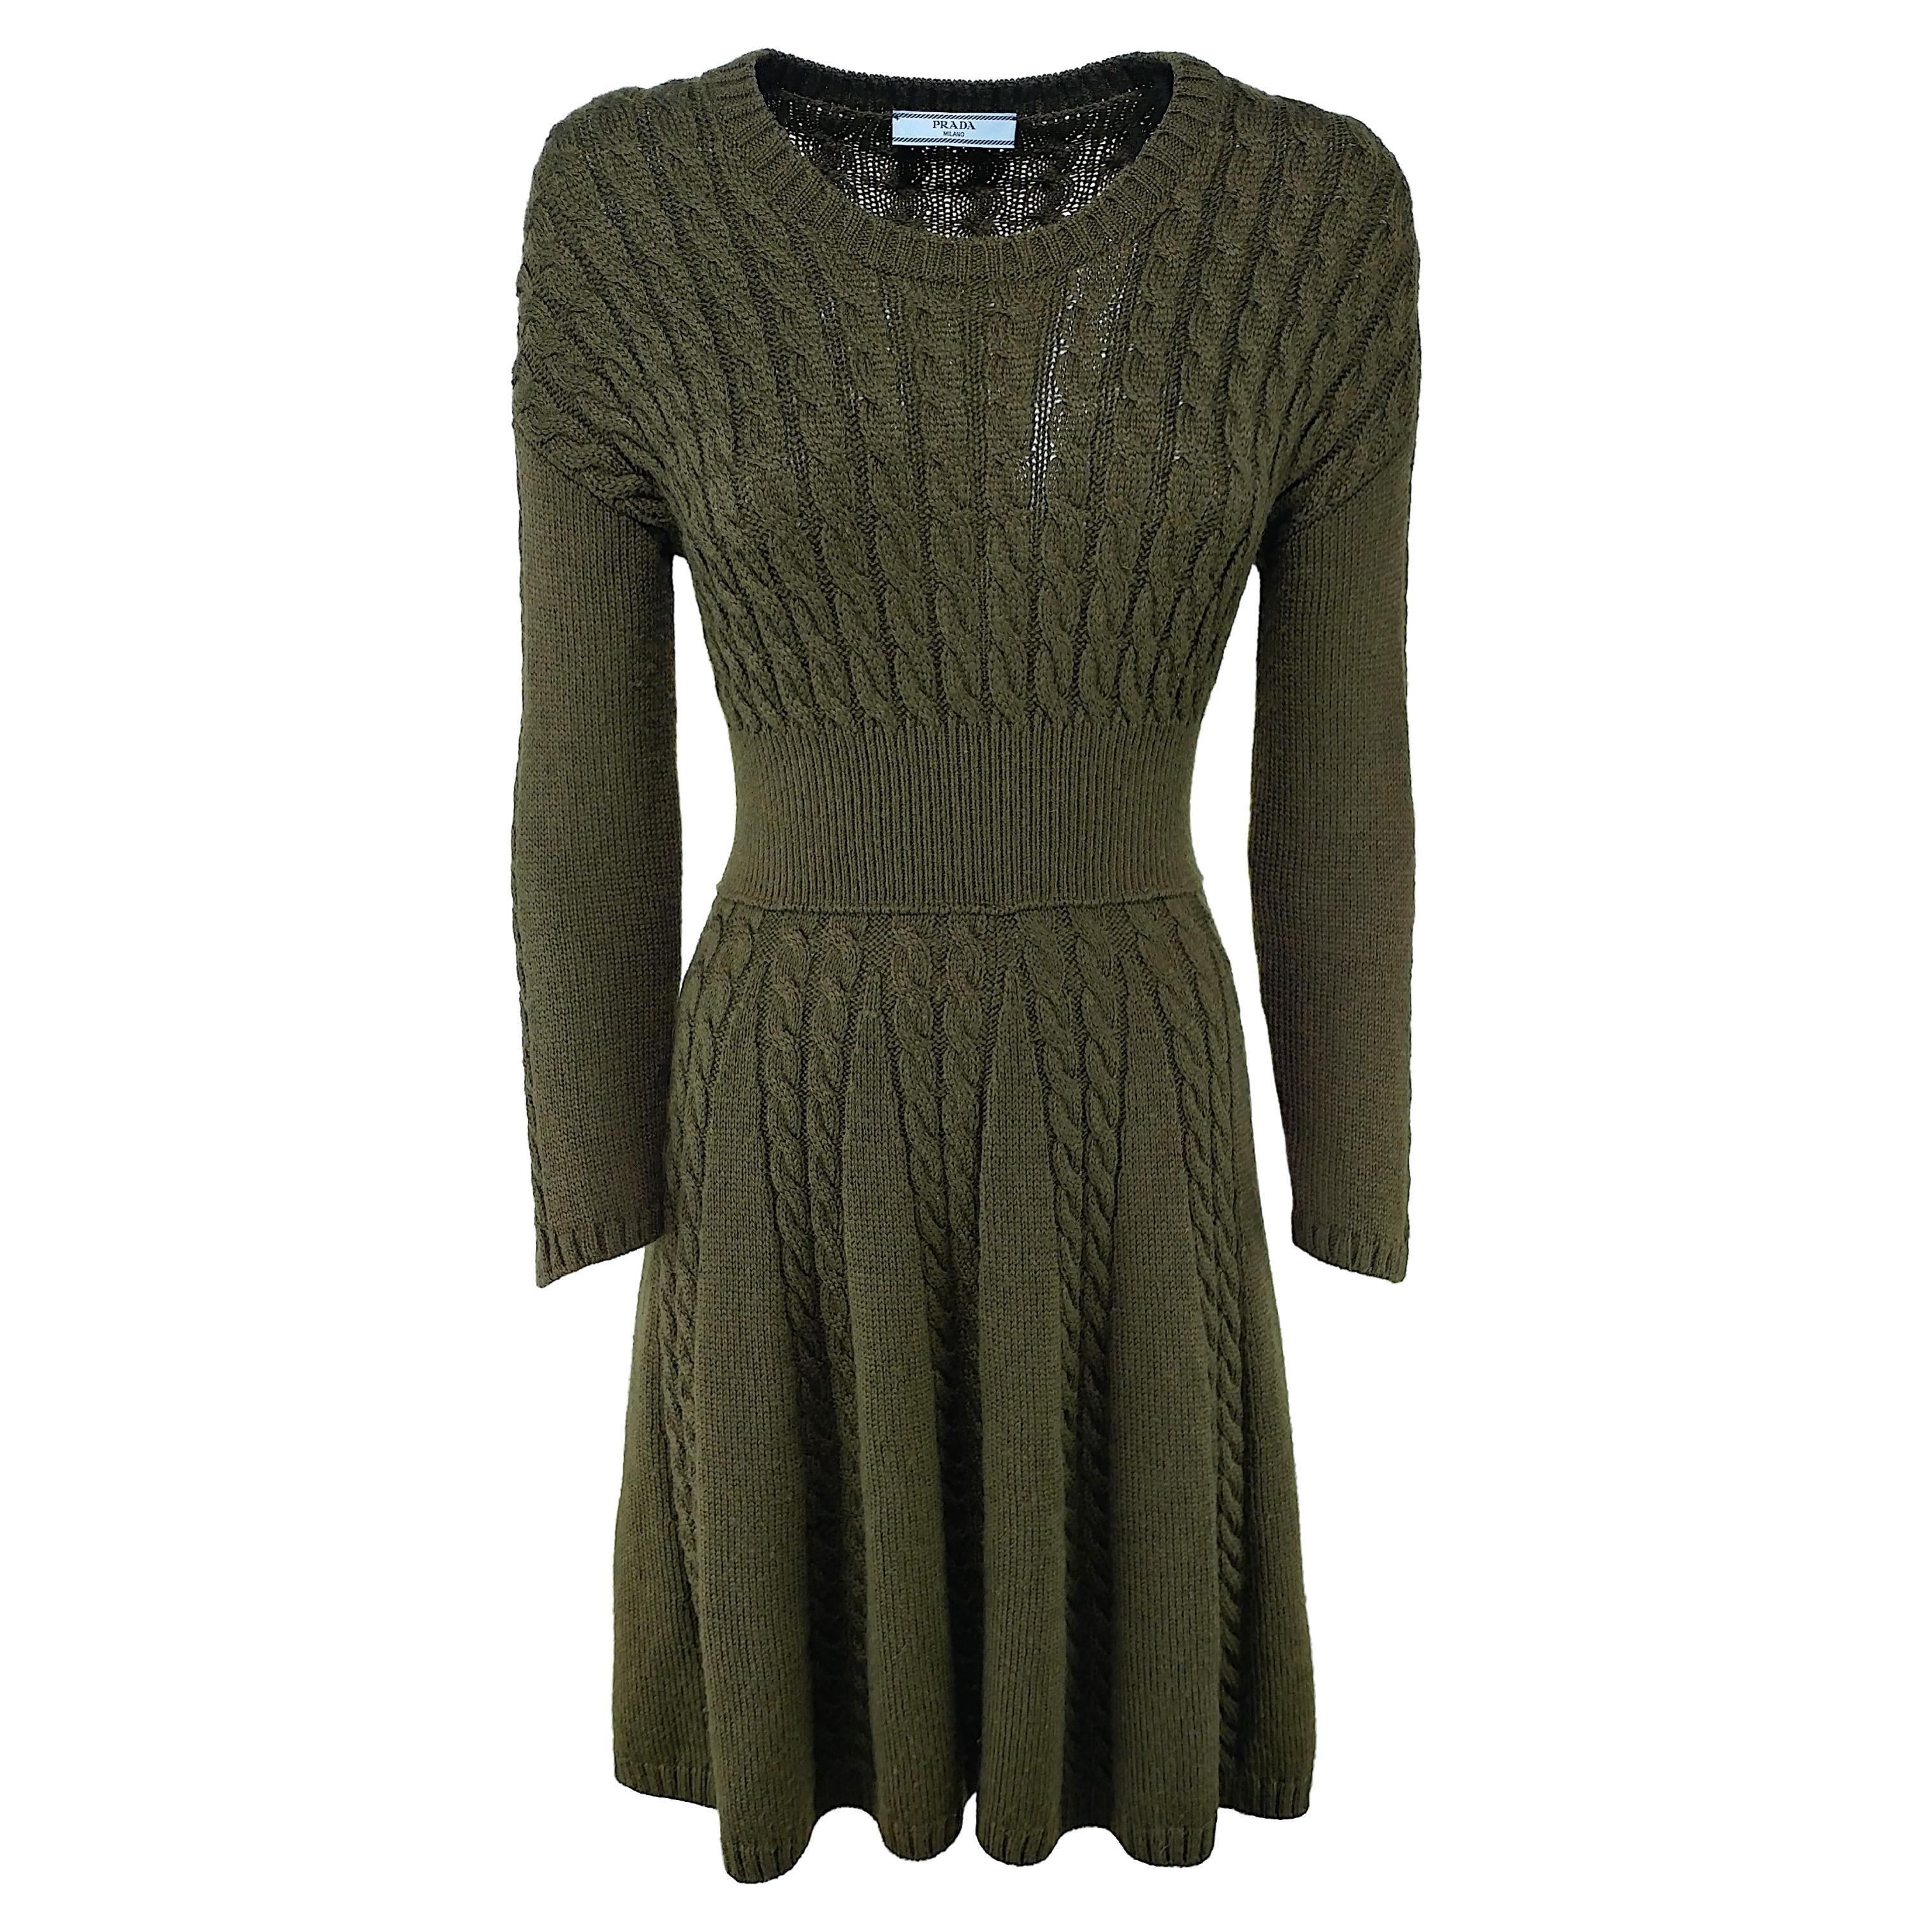 PRADA - Stretch Wool Knitted Olive Green Dress with Long Sleeves  Size 4US 36EU